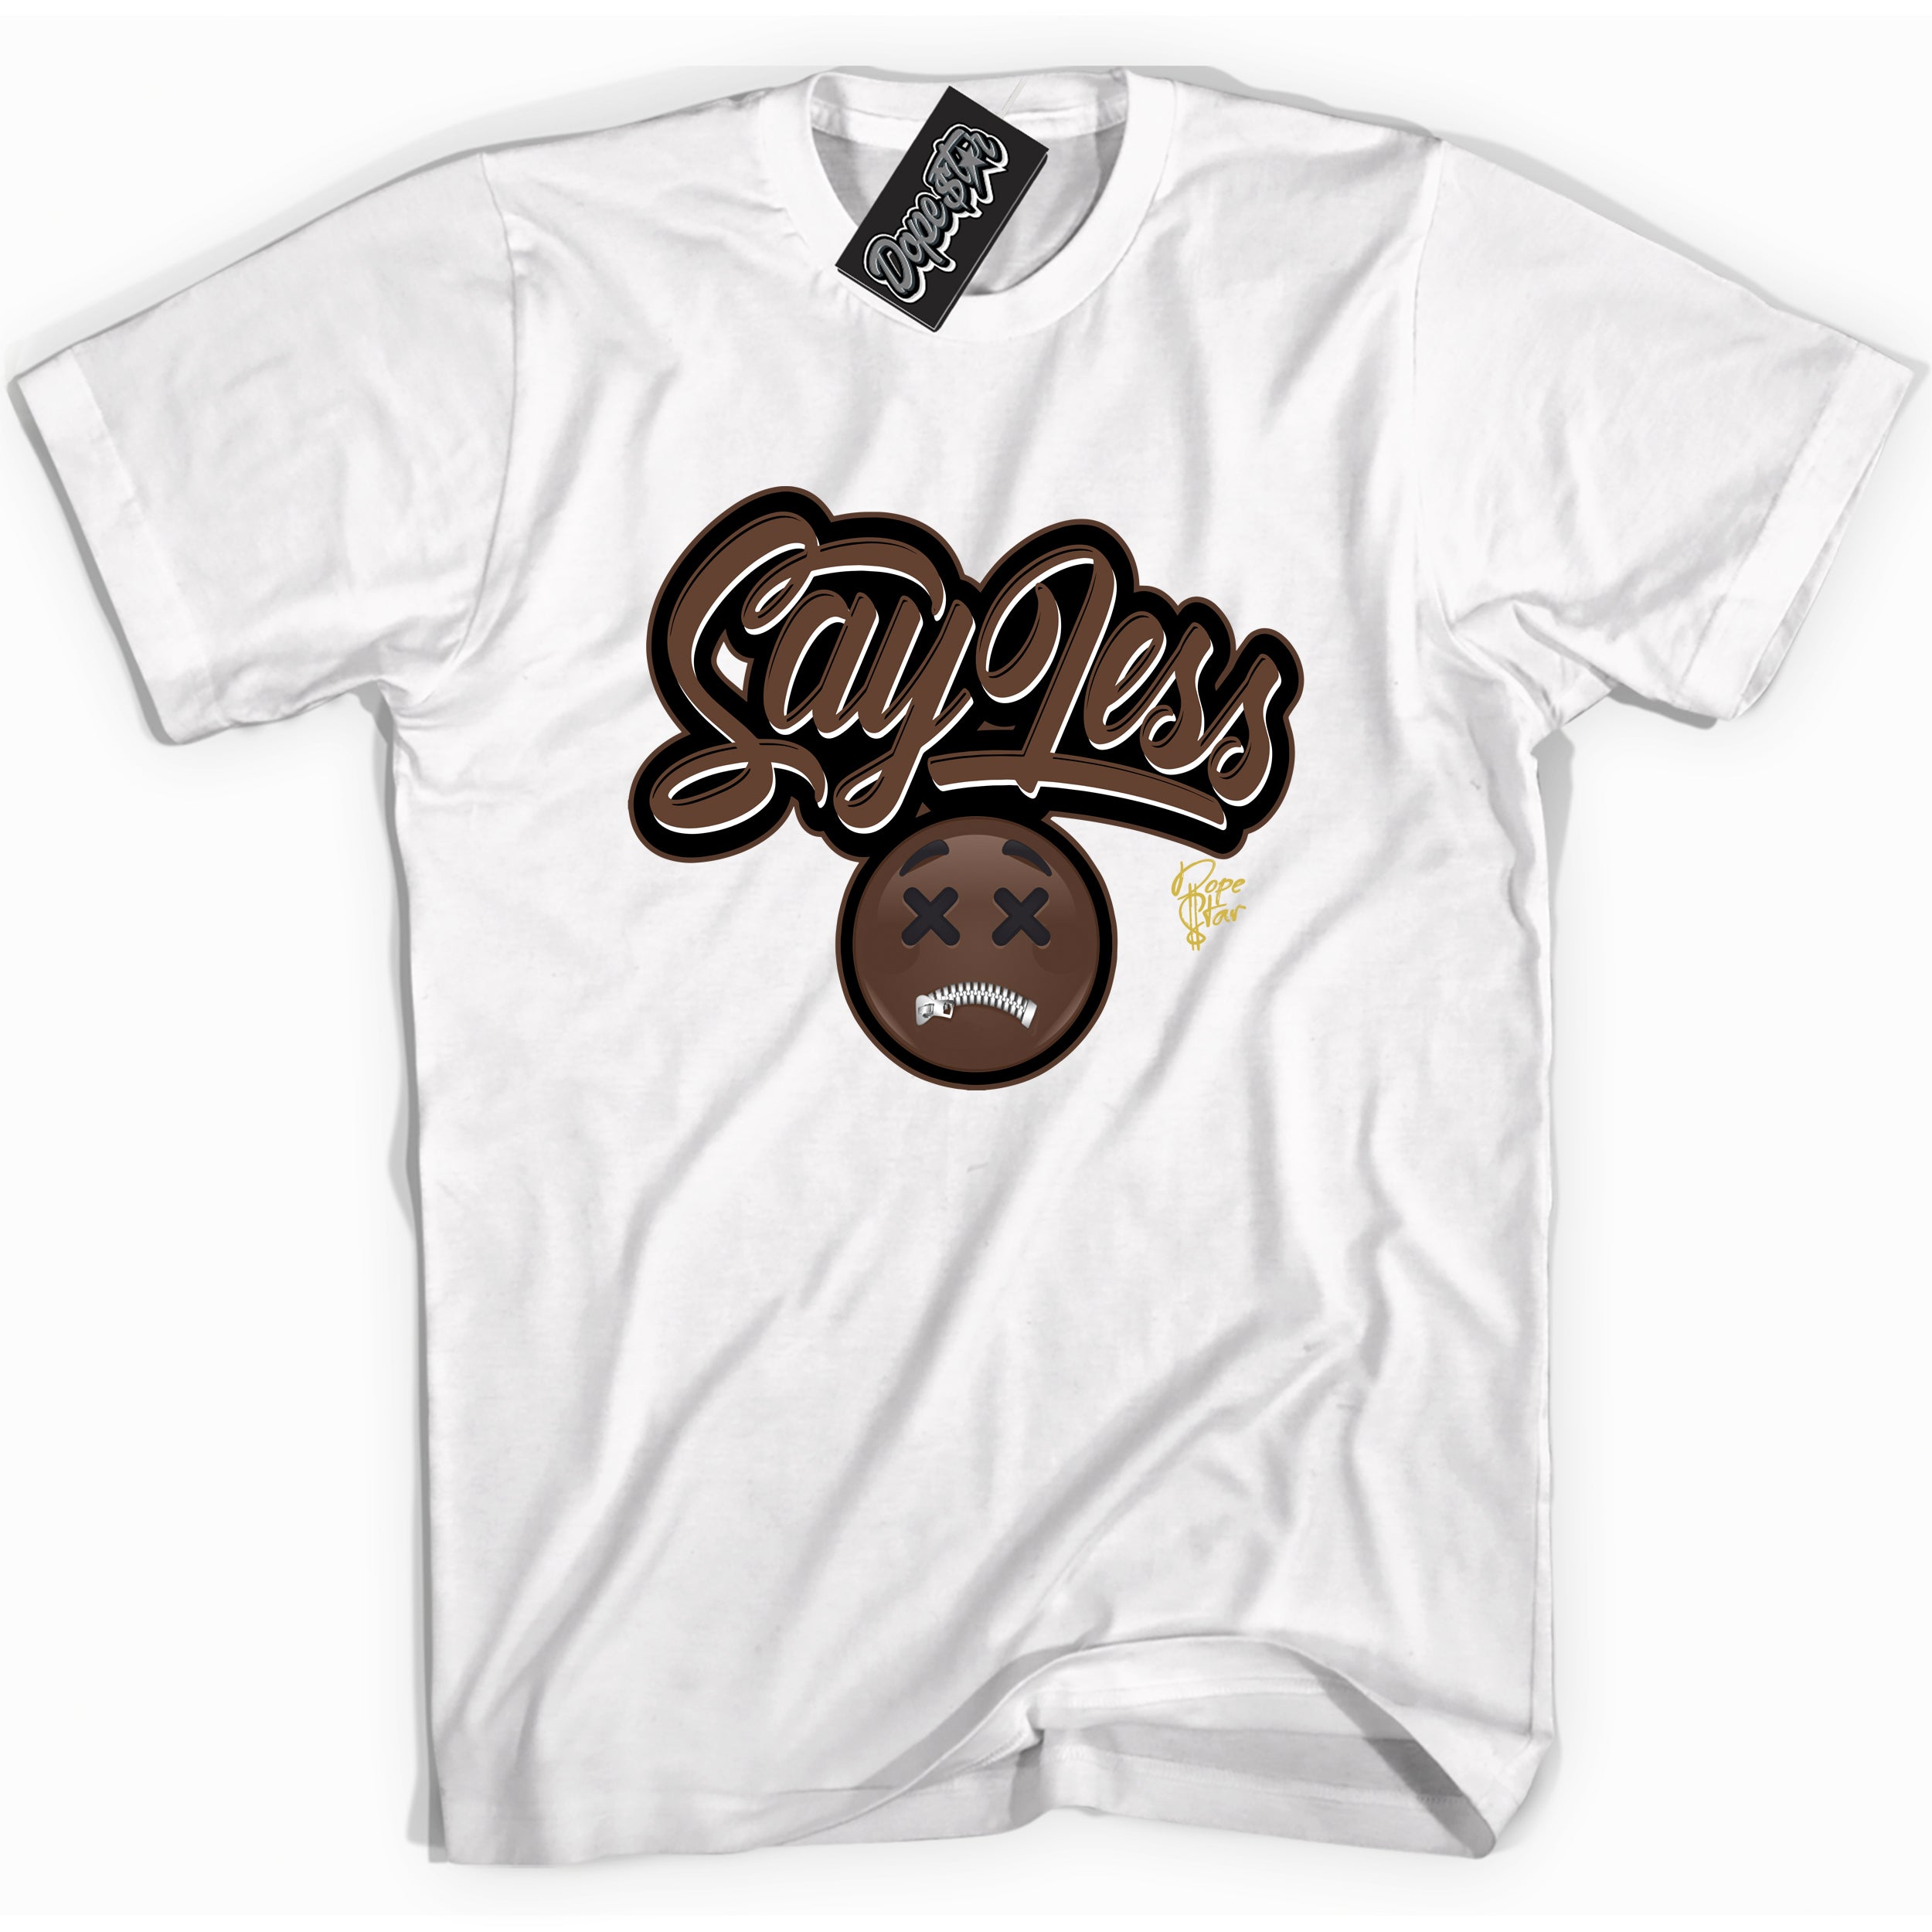 Cool White graphic tee with “ Say Less ” design, that perfectly matches Palomino 1s sneakers 